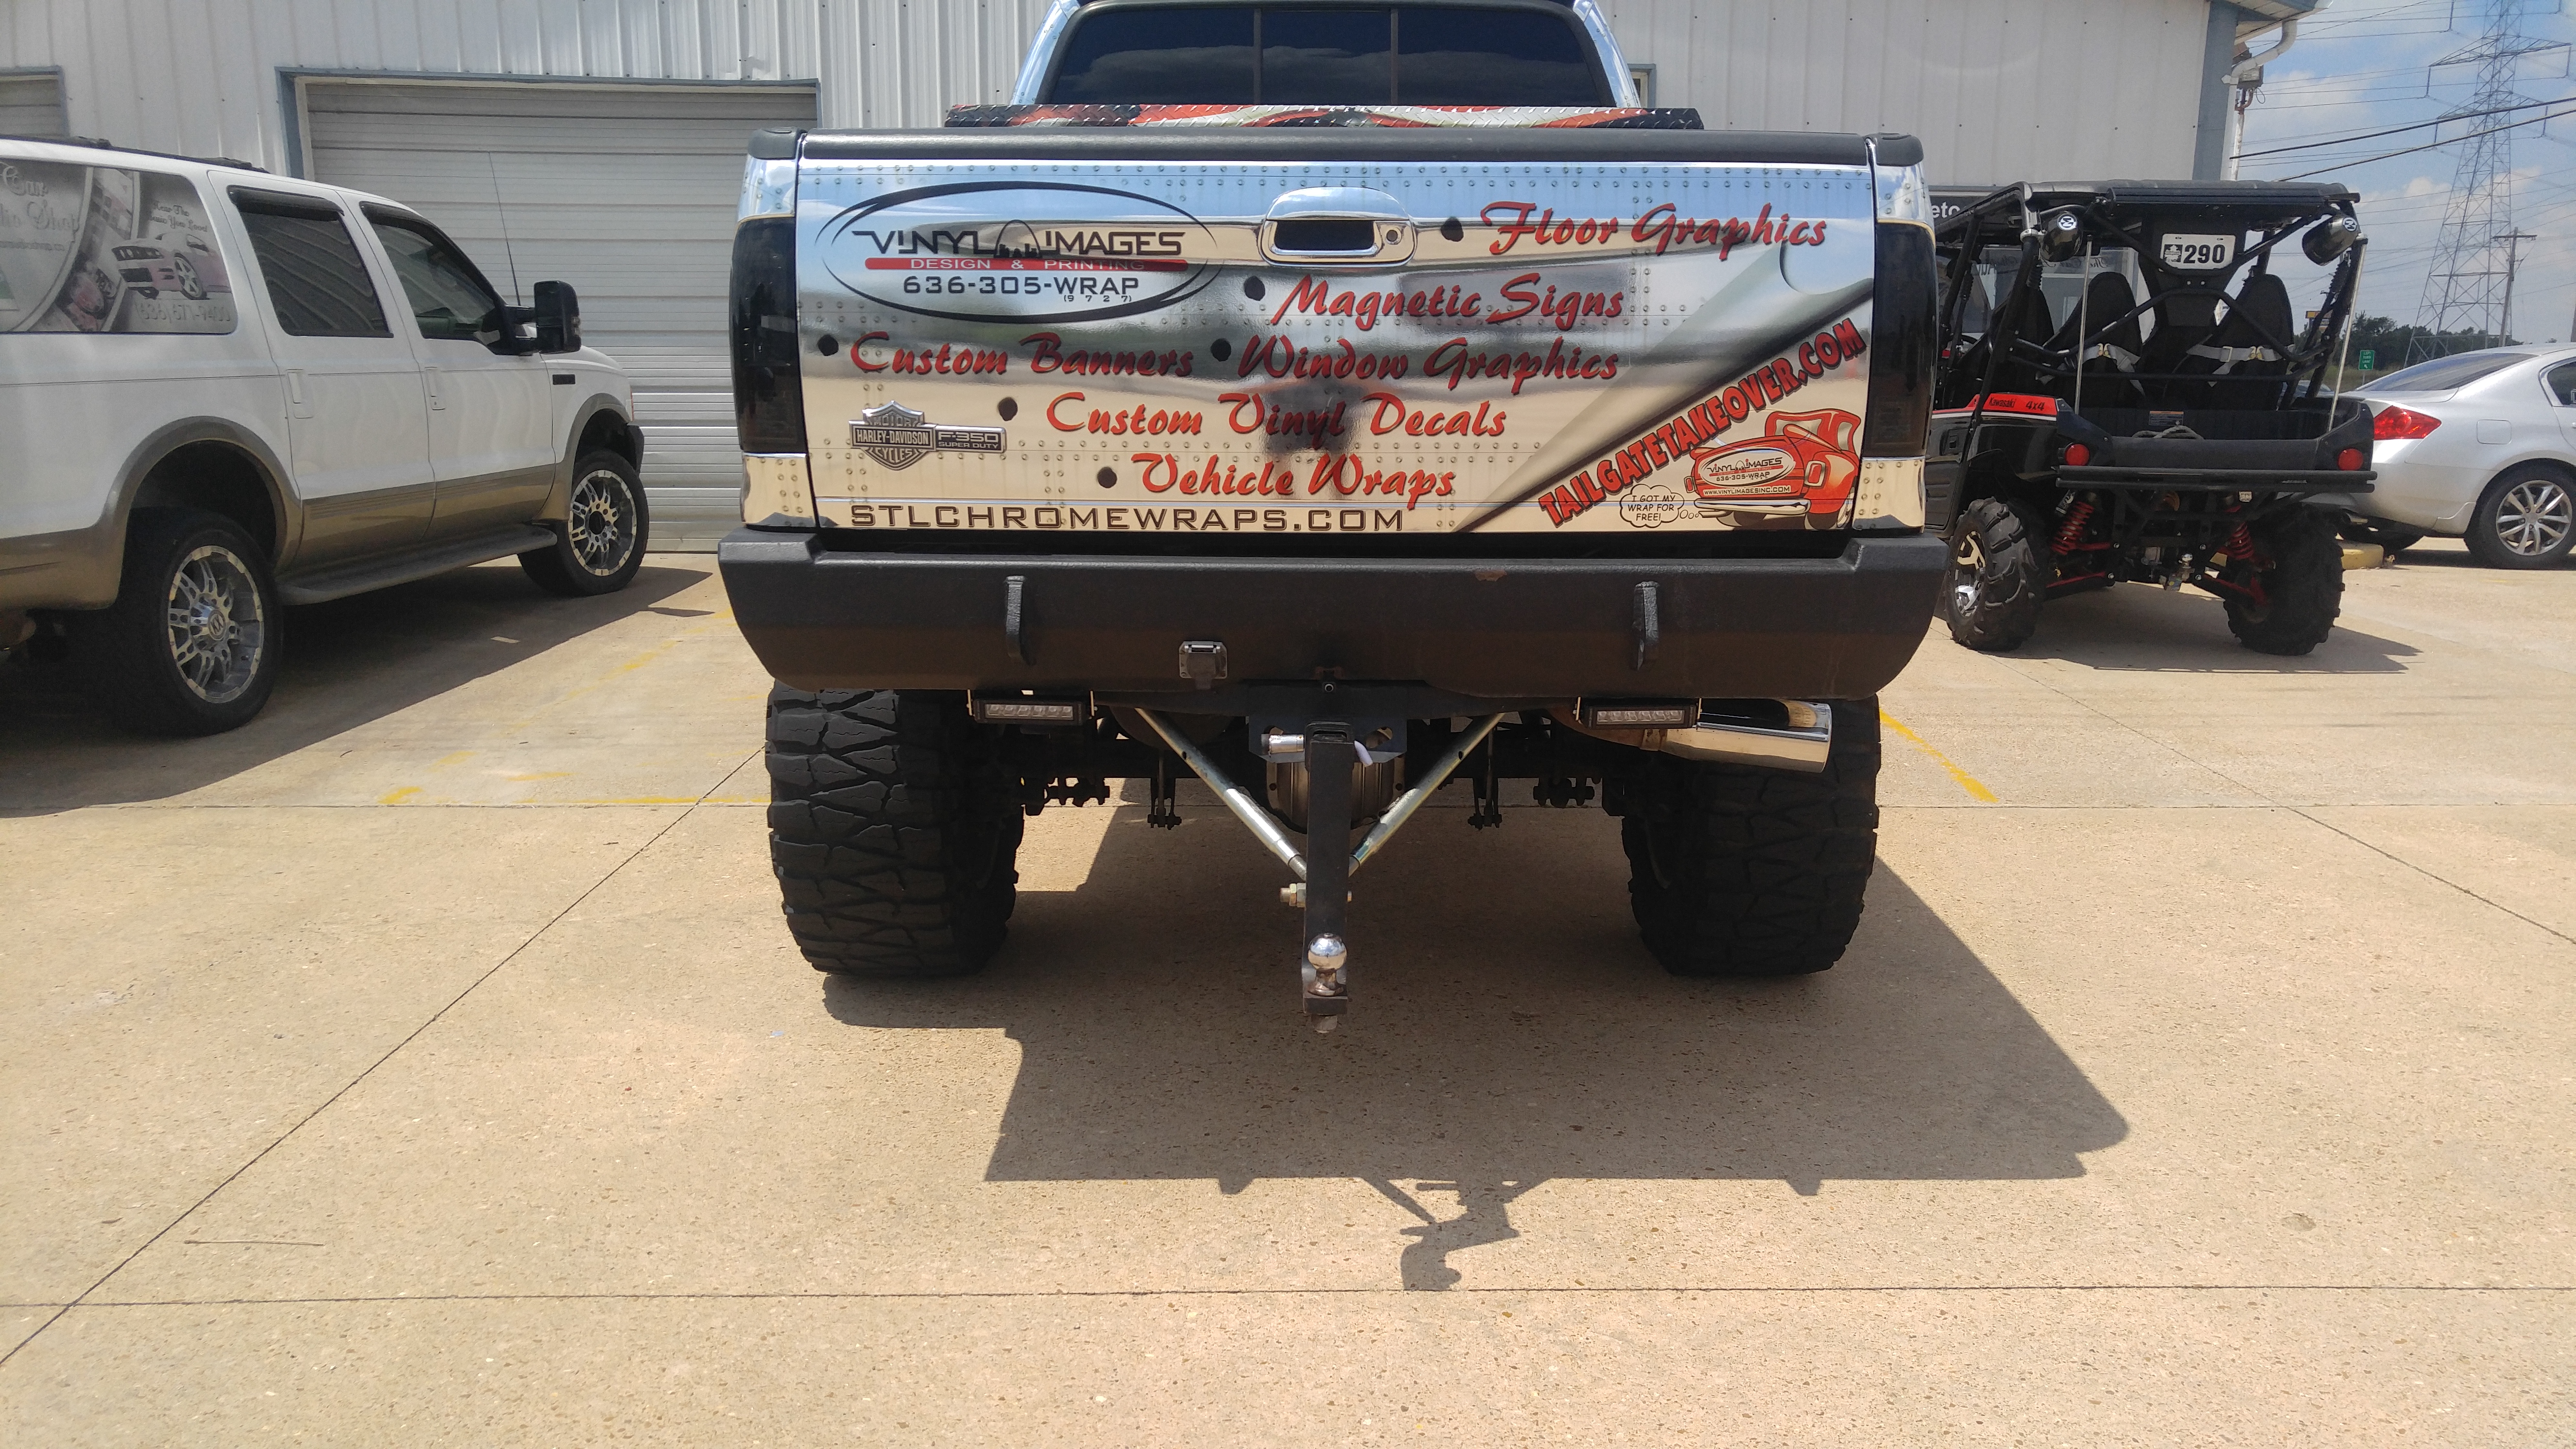 ford%20f350%20stage%20series%20light%20bar%206%20inch%20pair%20backup%20Vinyl%20Images%20(2).jpg